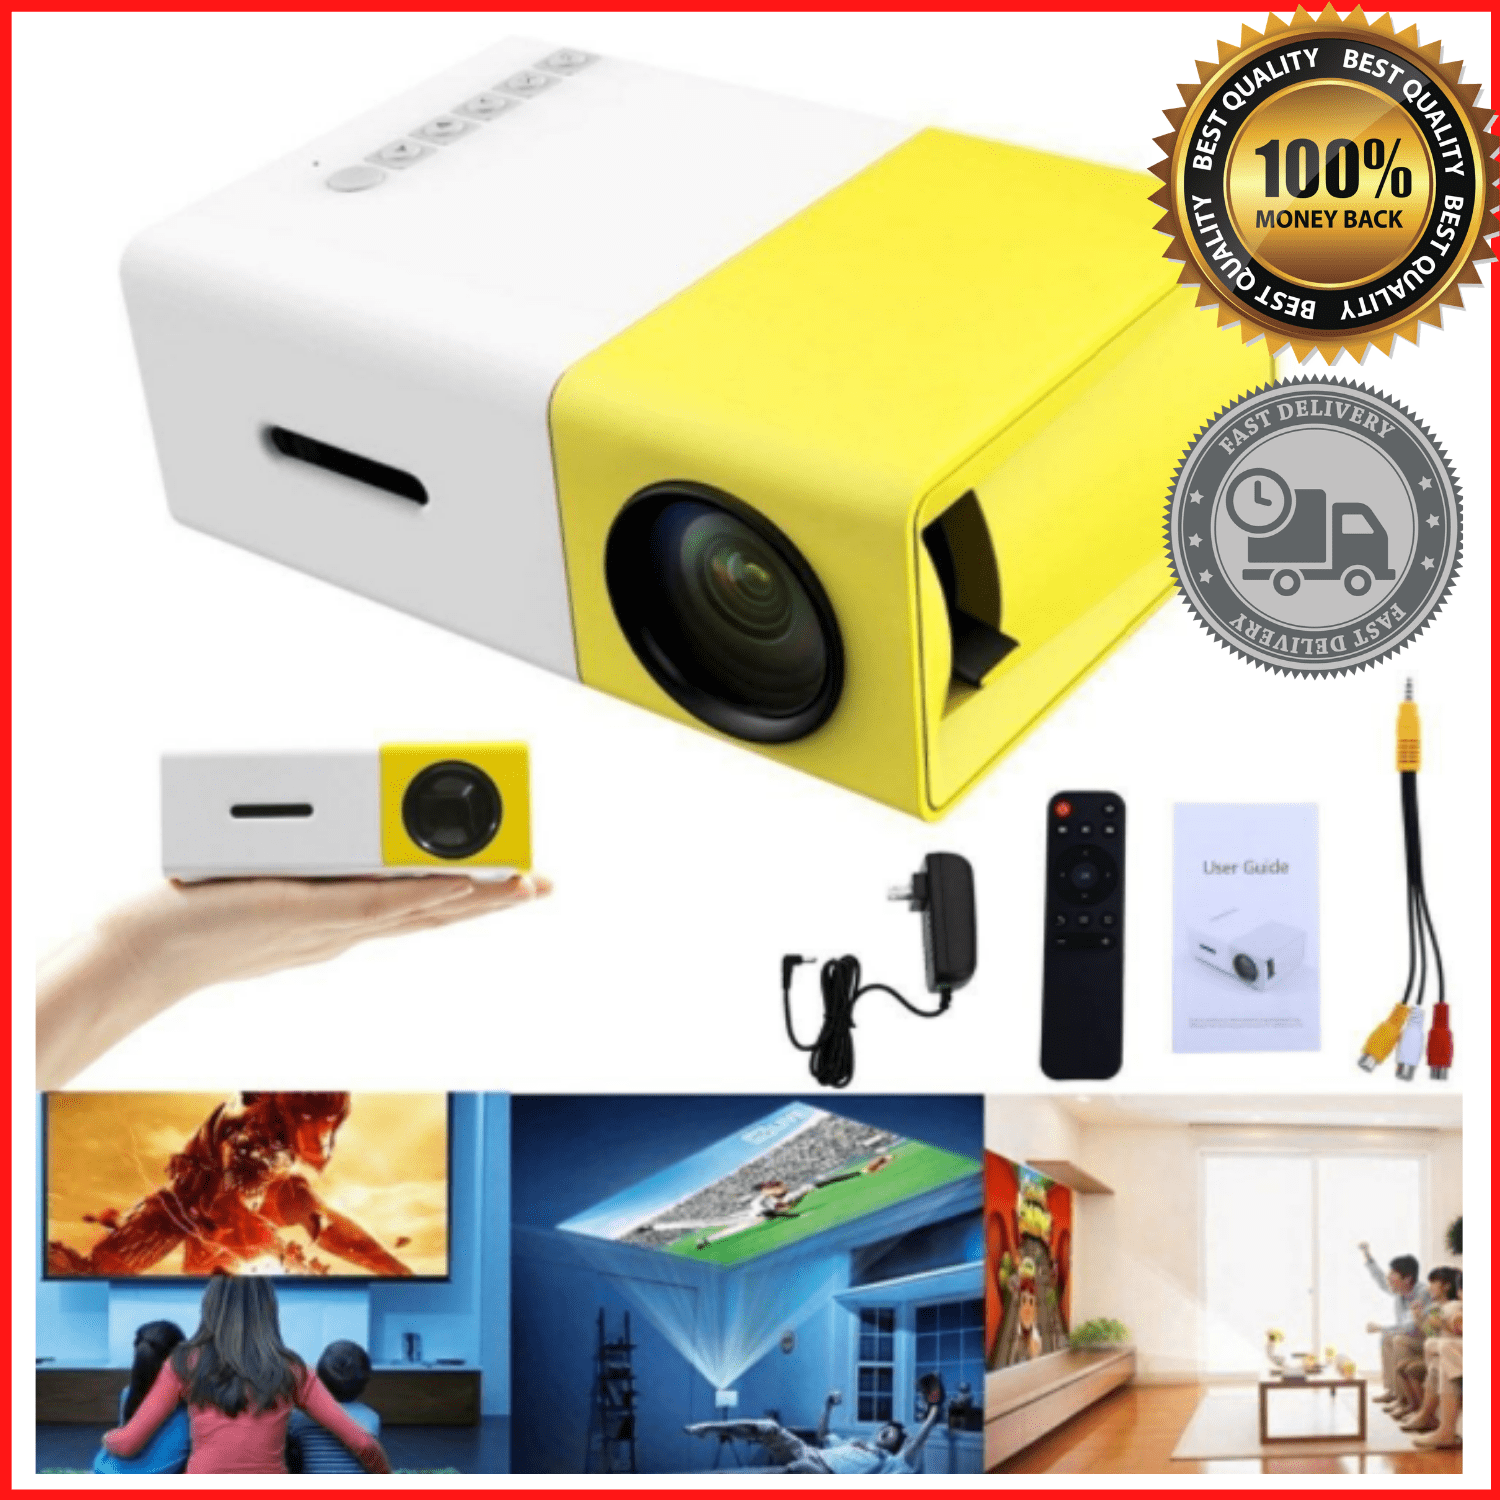 Great Gift Mini Projector,Portable 1080P LED Projector,Home Cinema Theater Indoor/Outdoor Movie projectors,Support Laptop PC Smartphone HDMI Input Pocket Projector for Party and Camping